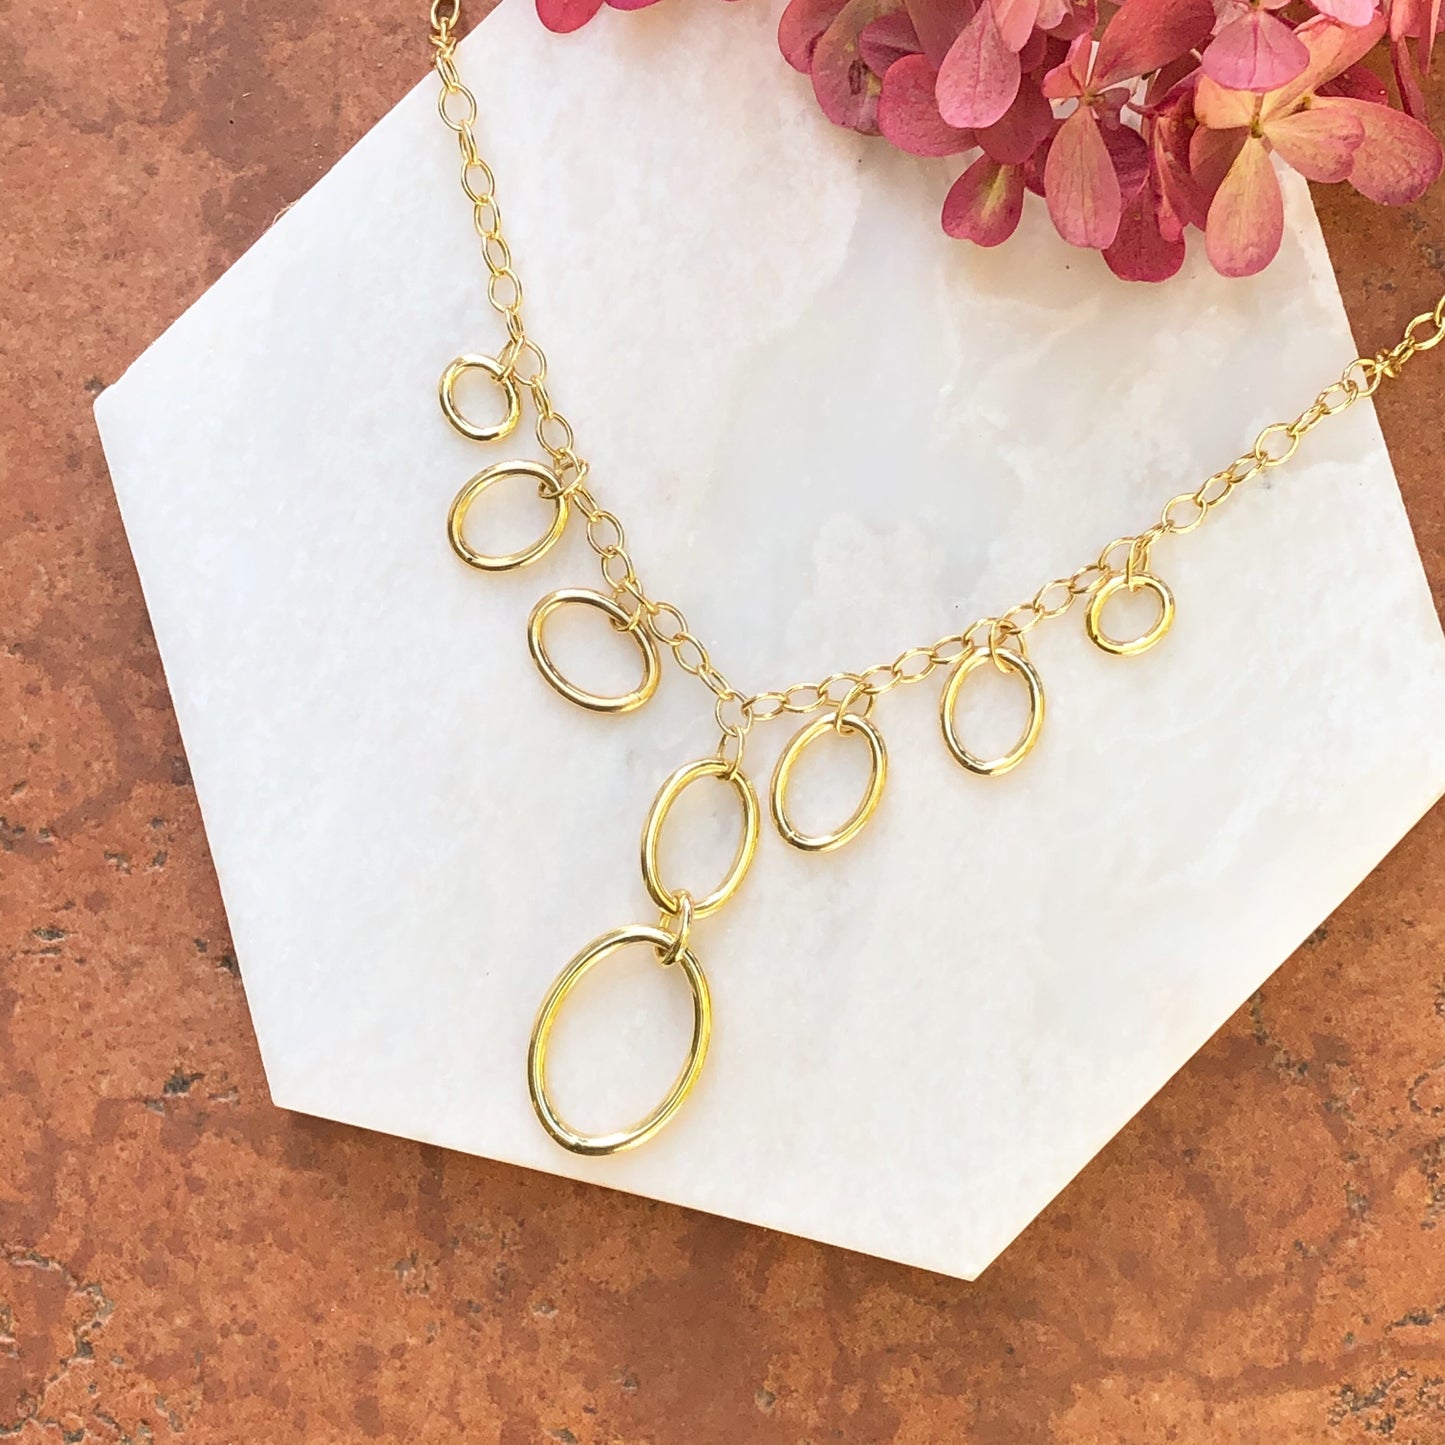 14KT Yellow Gold Polished Rolo Circles Lariat Necklace, 14KT Yellow Gold Polished Rolo Circles Lariat Necklace - Legacy Saint Jewelry